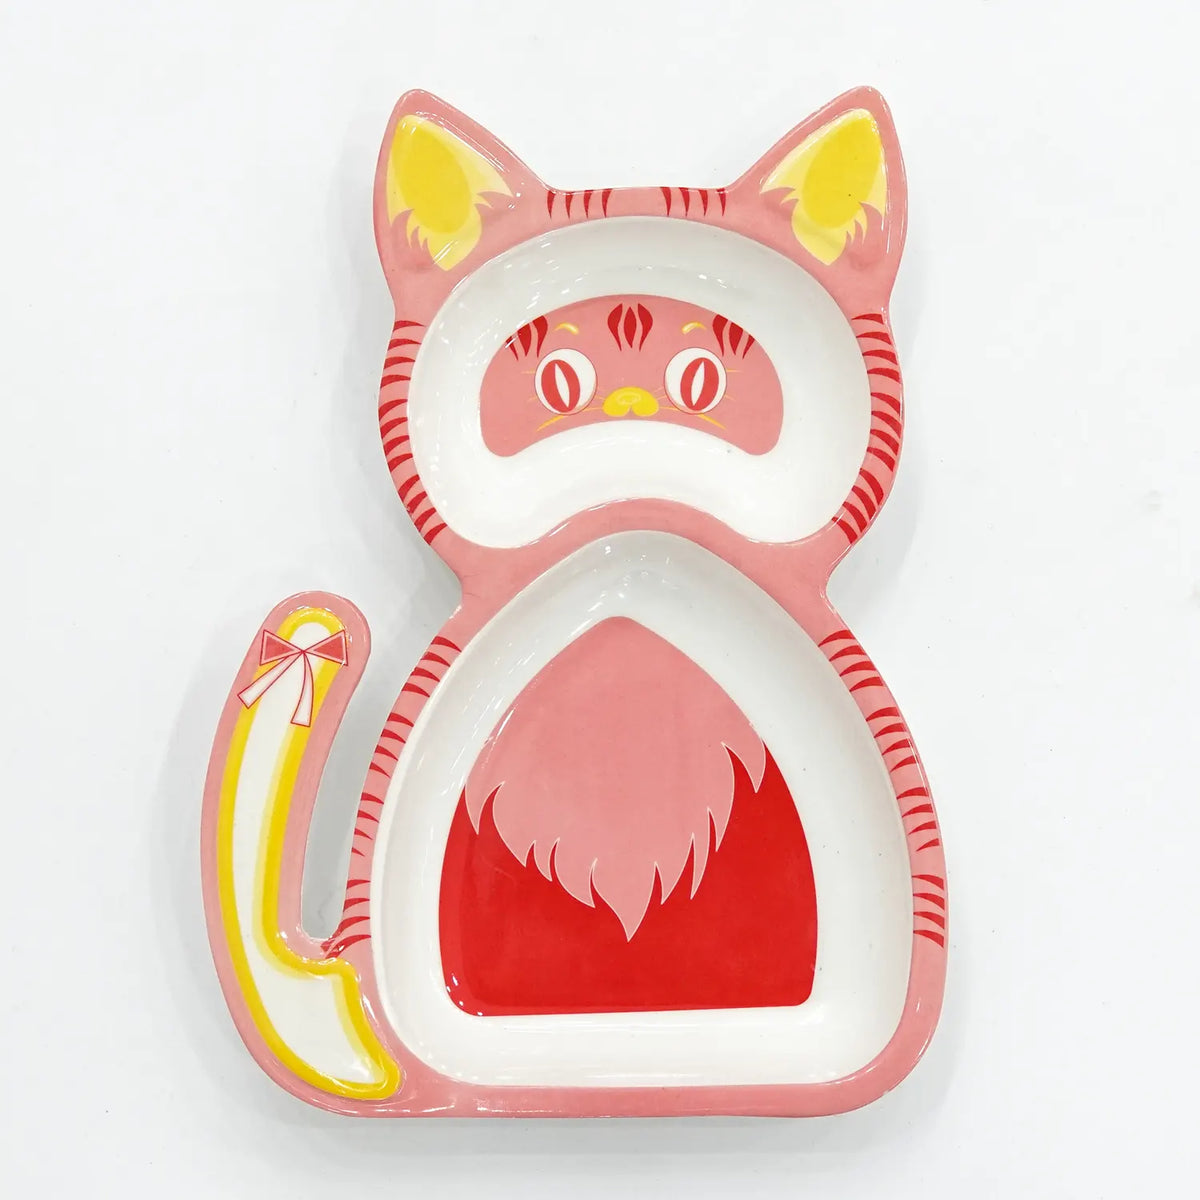 Cat Design High-Quality Melamine Dish: Infuse Charm and Durability into Your Dining Décor!